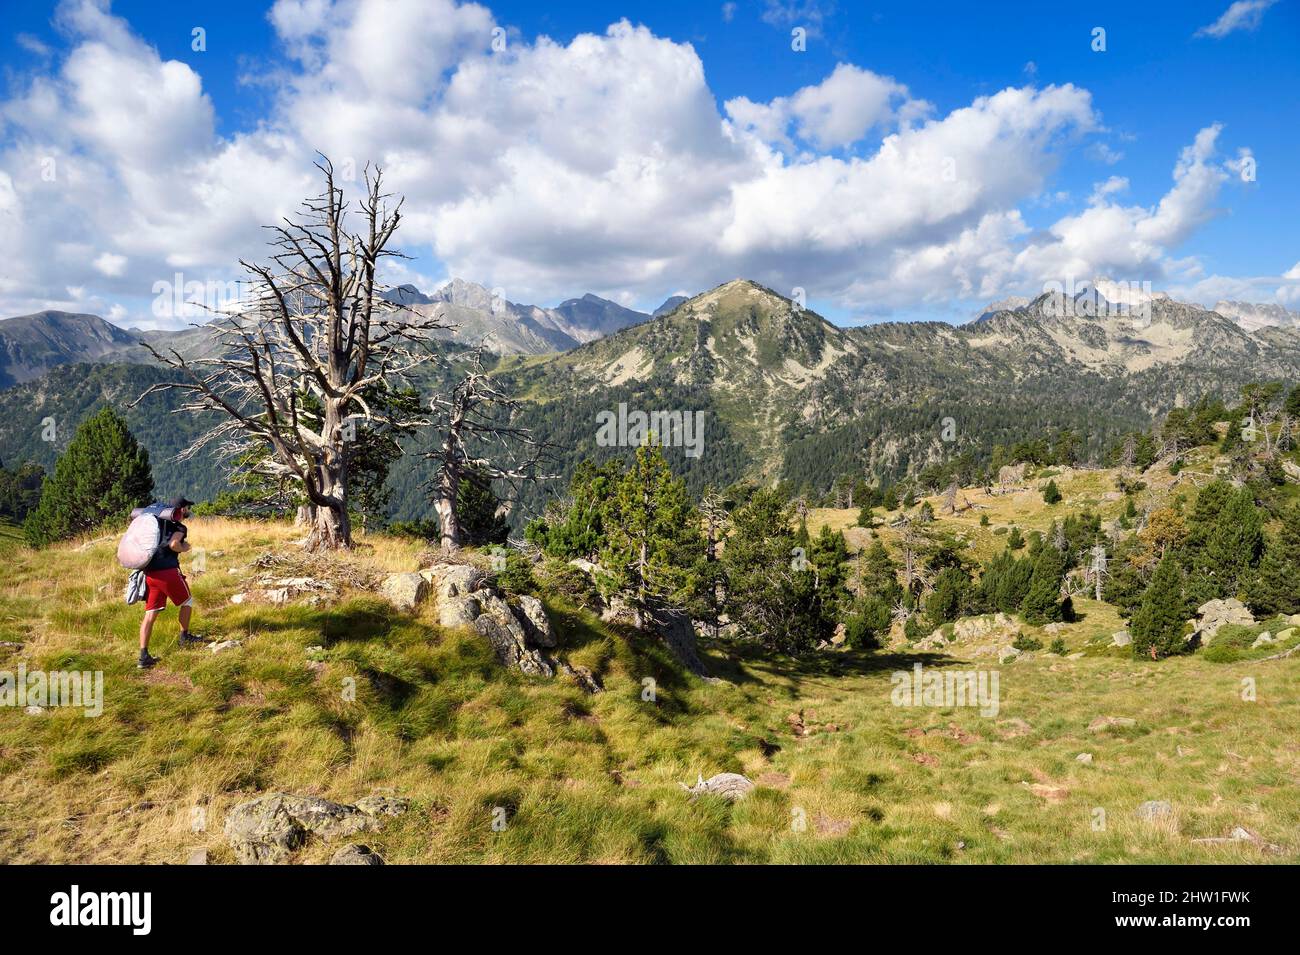 France, Hautes Pyrenees, Saint Lary Soulan and Vielle-Aure, hike on a variant of the GR10 between the Portet pass and the Bastan lakes on the edge of the Neouvielle nature reserve, the Neouvielle massif in the background Stock Photo